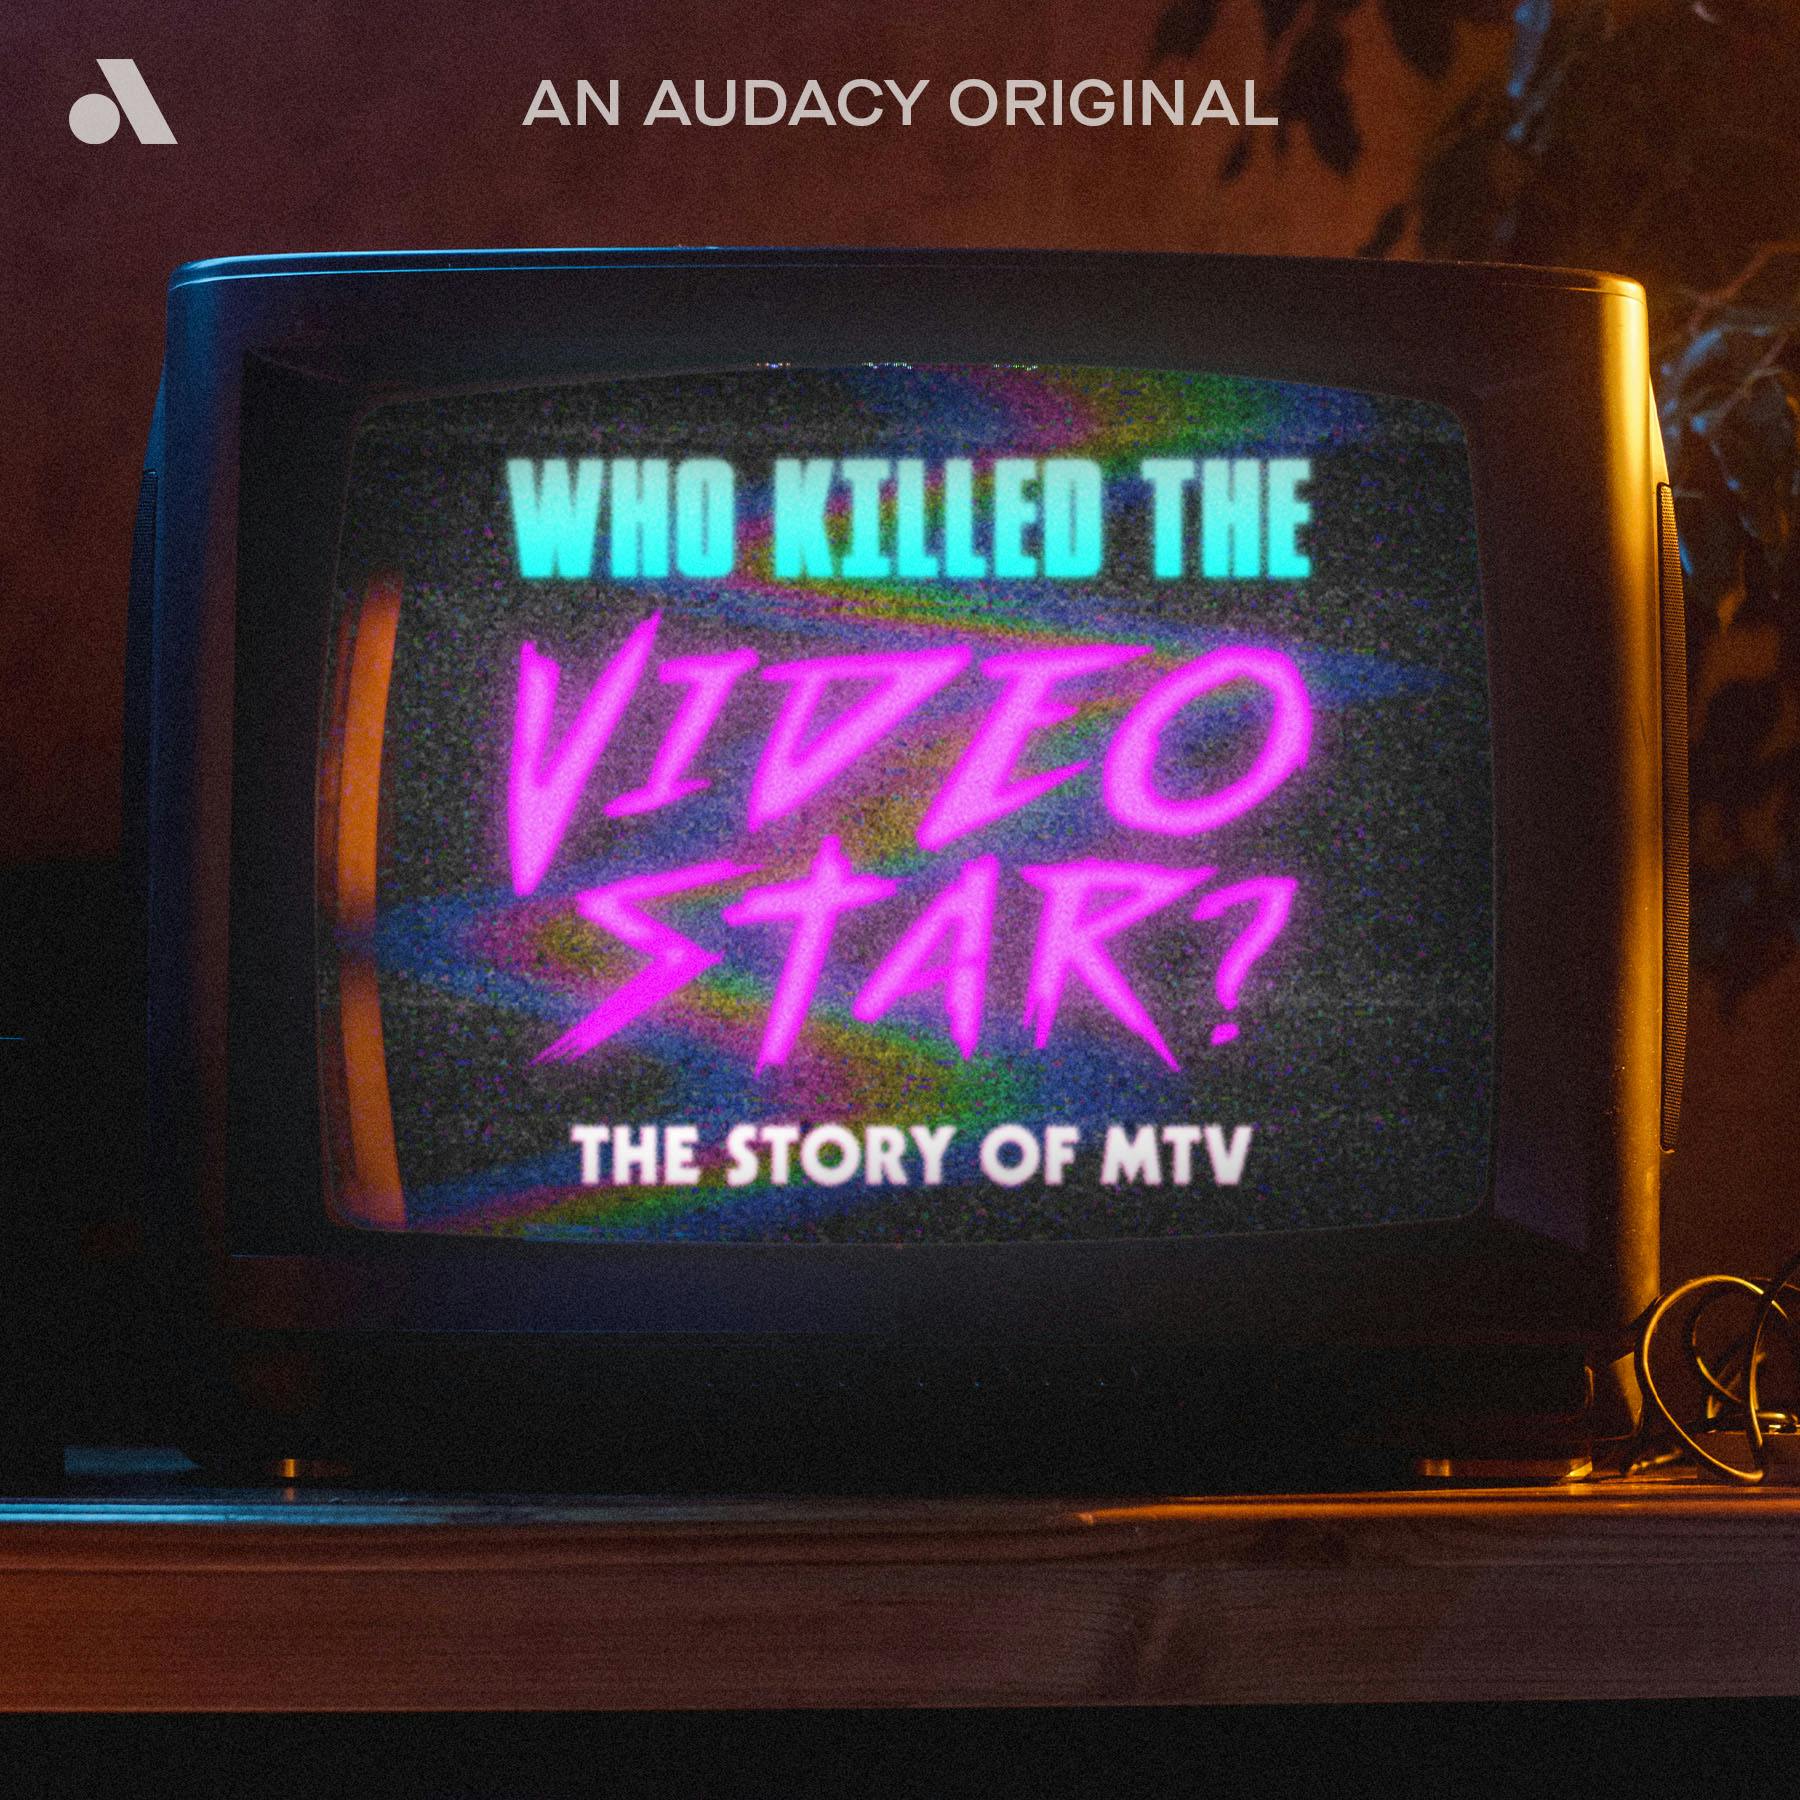 Introducing: Who Killed The Video Star: The Story of MTV by Audacy Studios